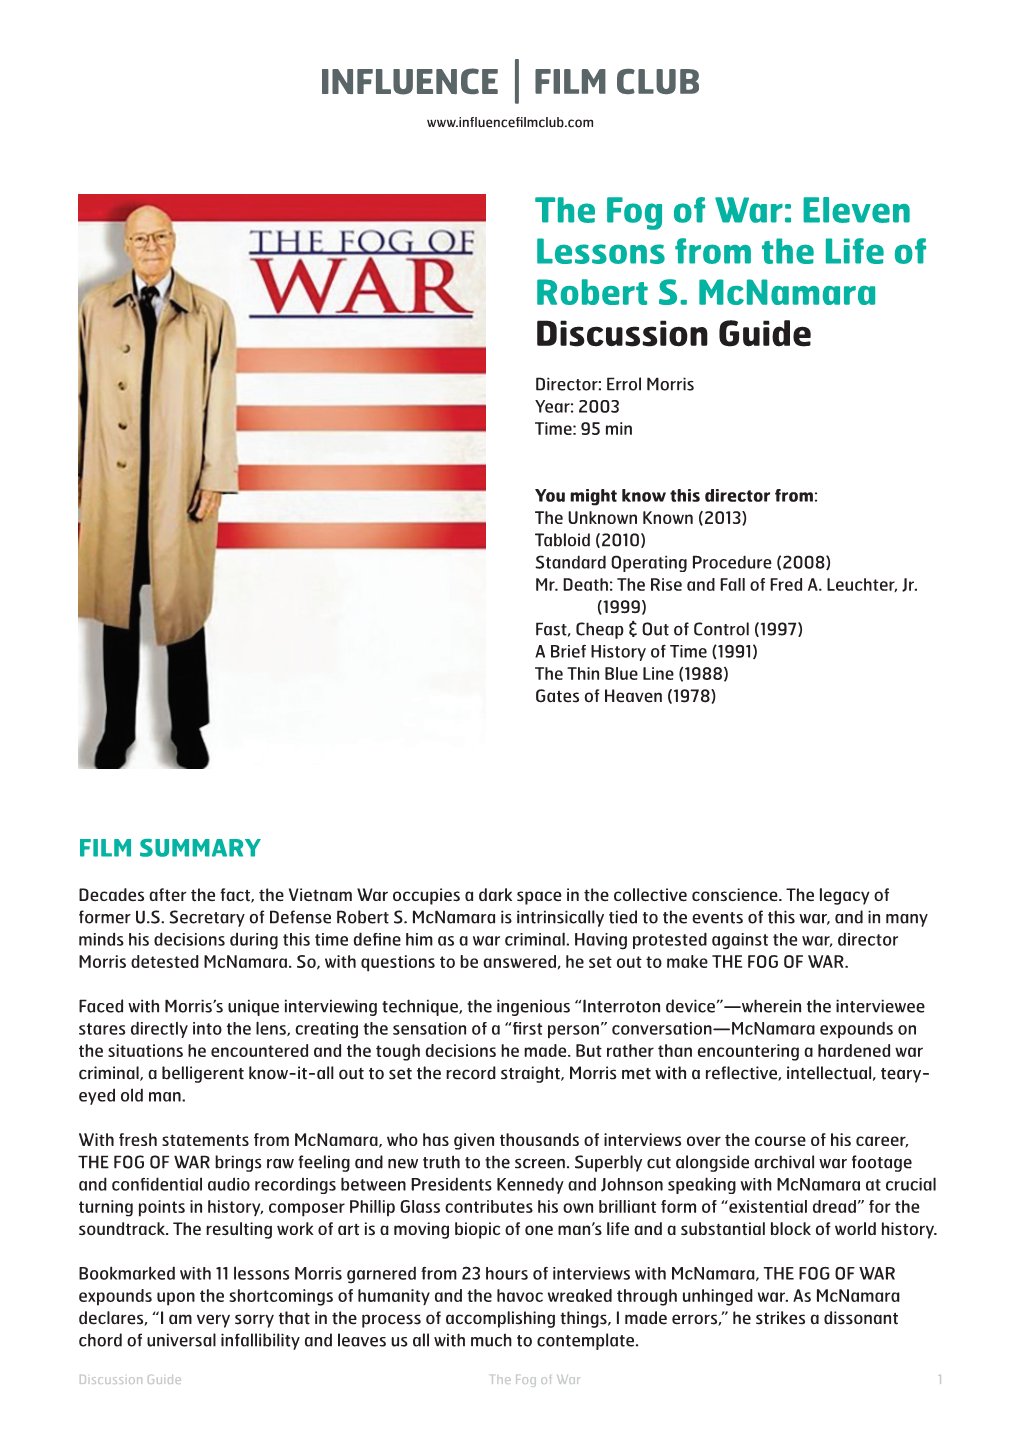 The Fog of War: Eleven Lessons from the Life of Robert S